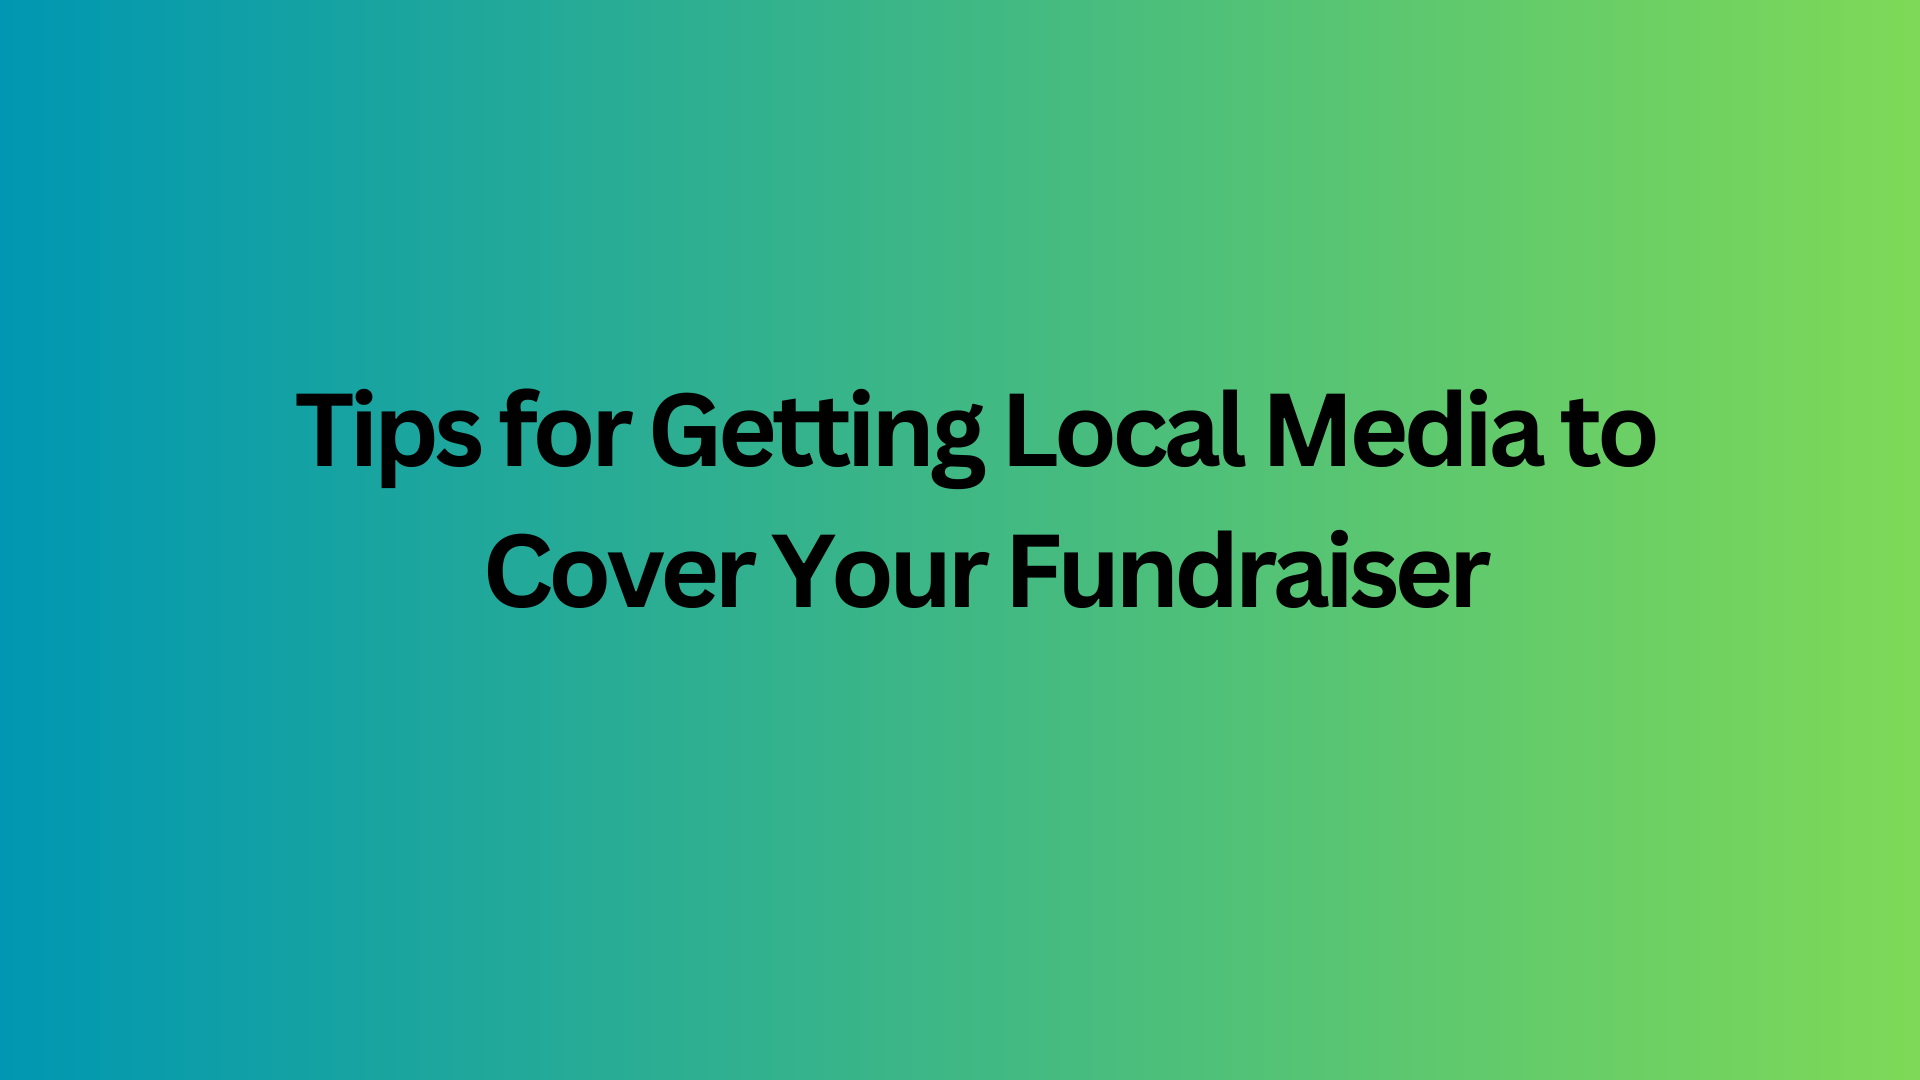 Tips for Getting Local Media to Cover Your Fundraiser